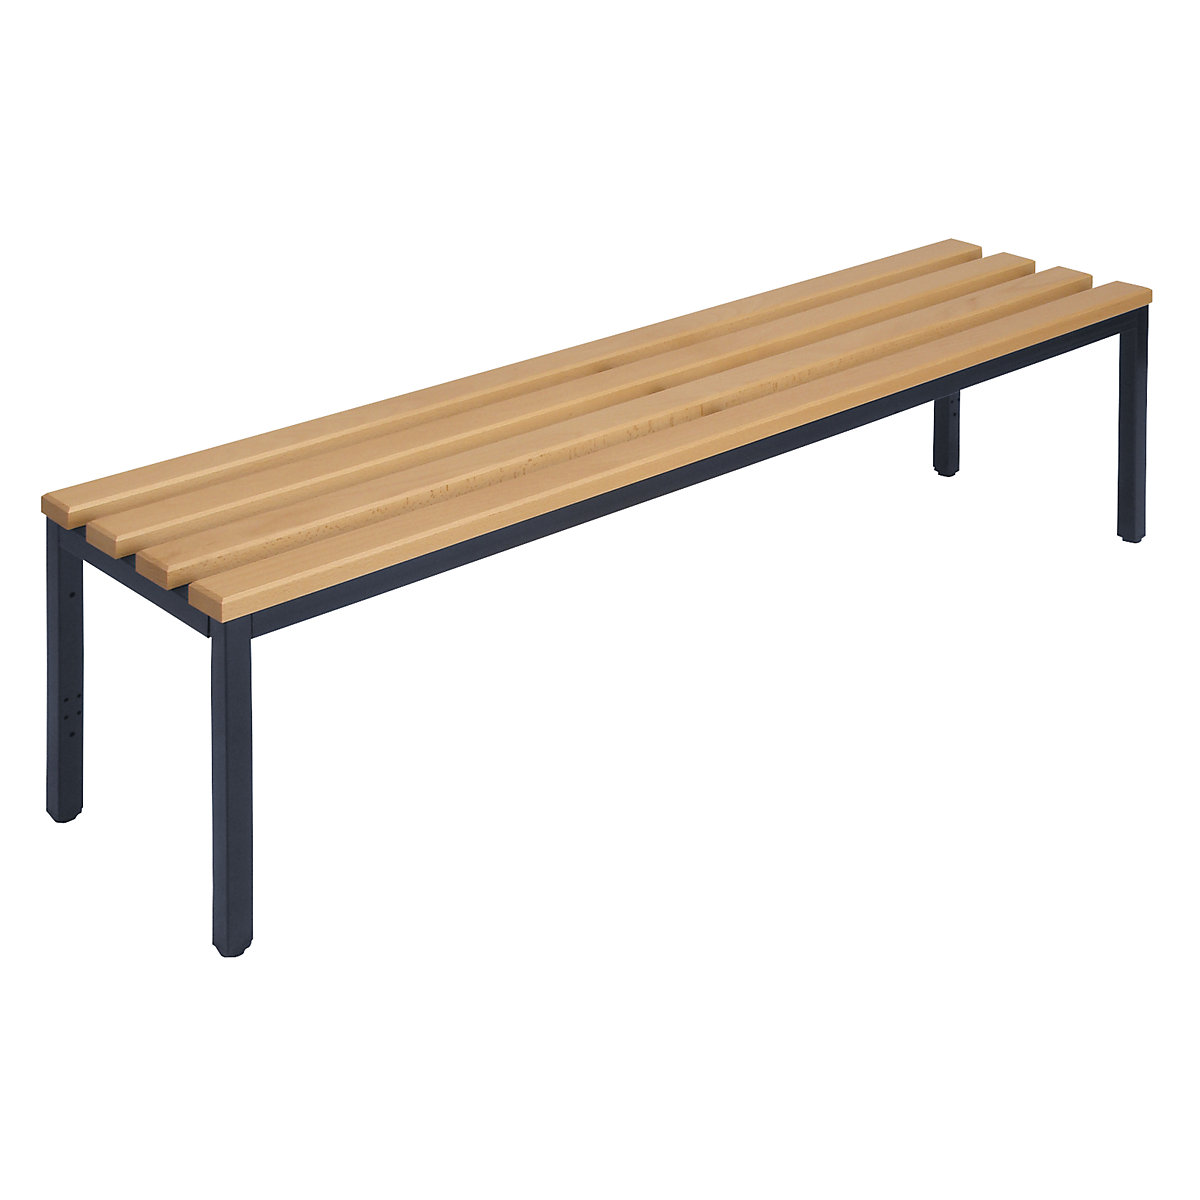 Wolf – Cloakroom bench without back rest, beech wood slats, length 1500 mm